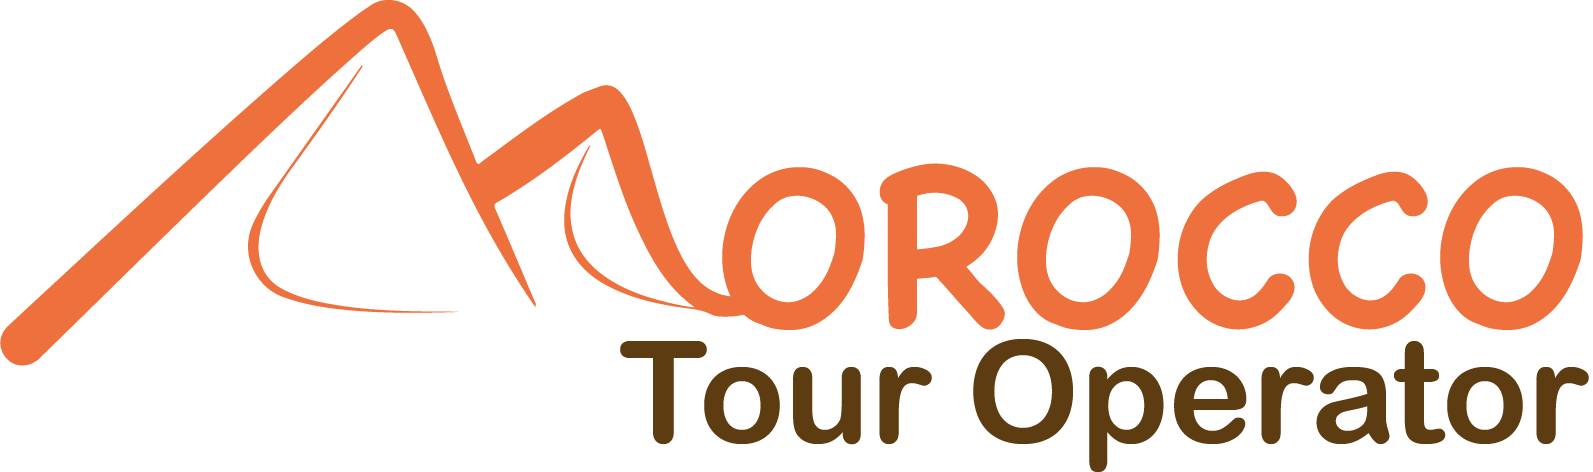 Welcome to Morocco Tour Operator agency